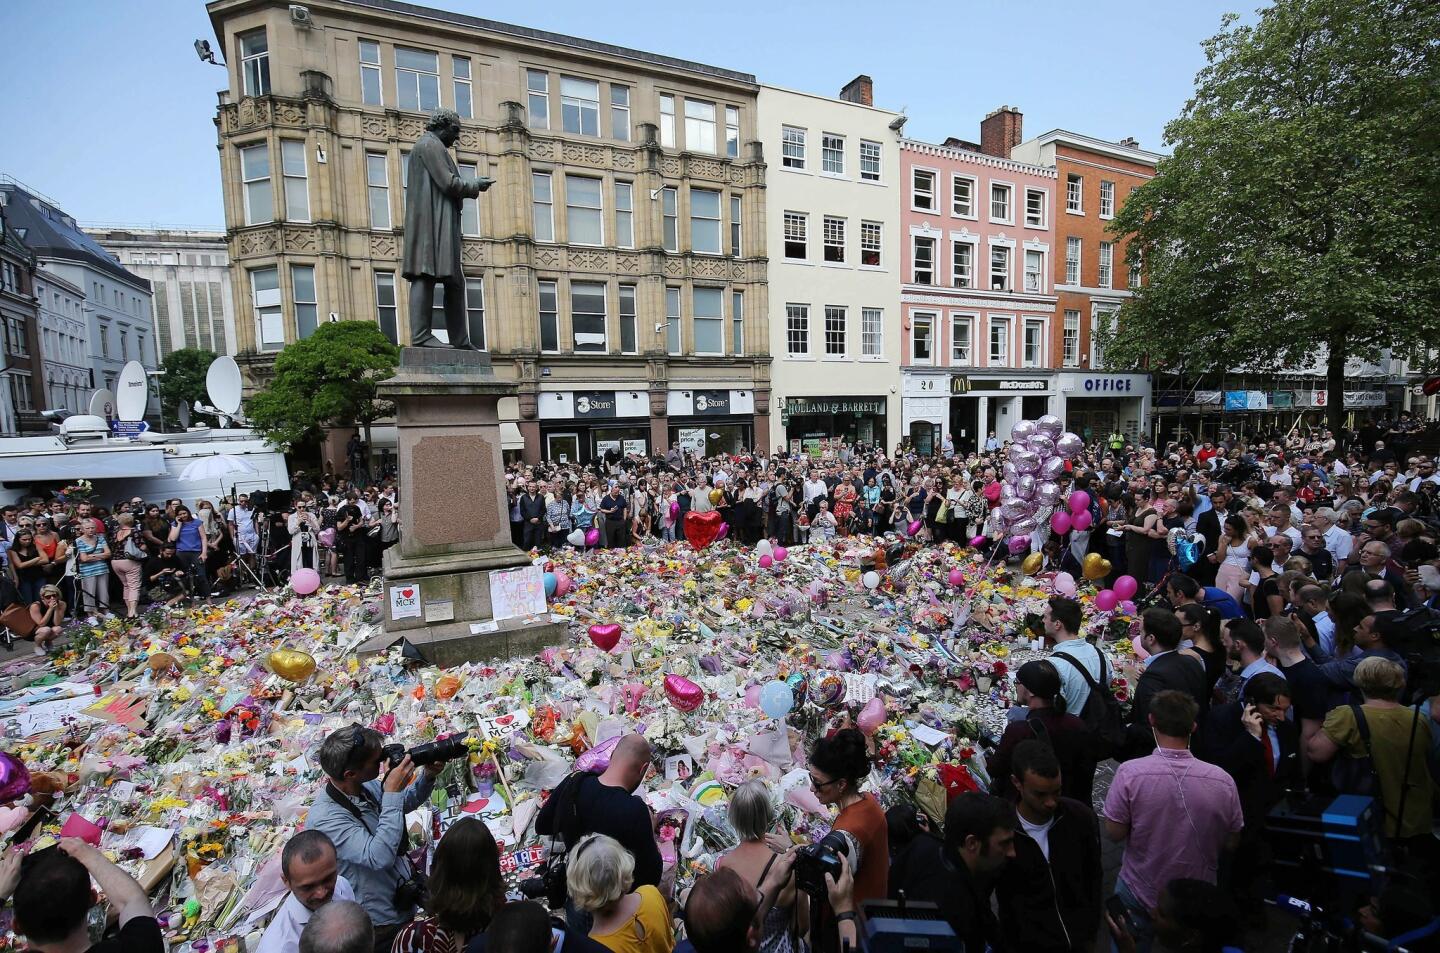 People pay their respects to the victims of the Manchester bombing with a nationwide minute of silence in St. Ann's Square on May 25, 2017.